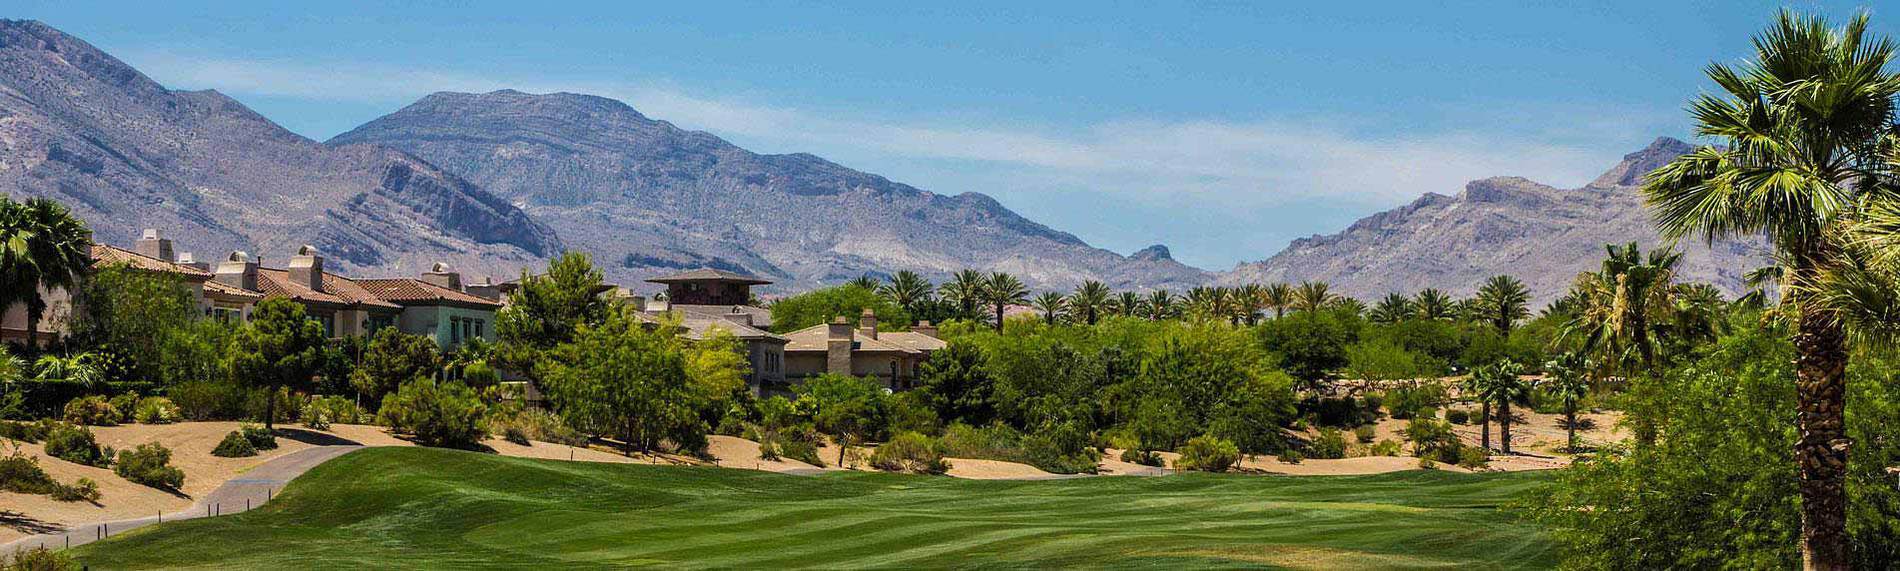 Seven Hills Homes for Sale - Seven Hills Luxury Homes in Henderson